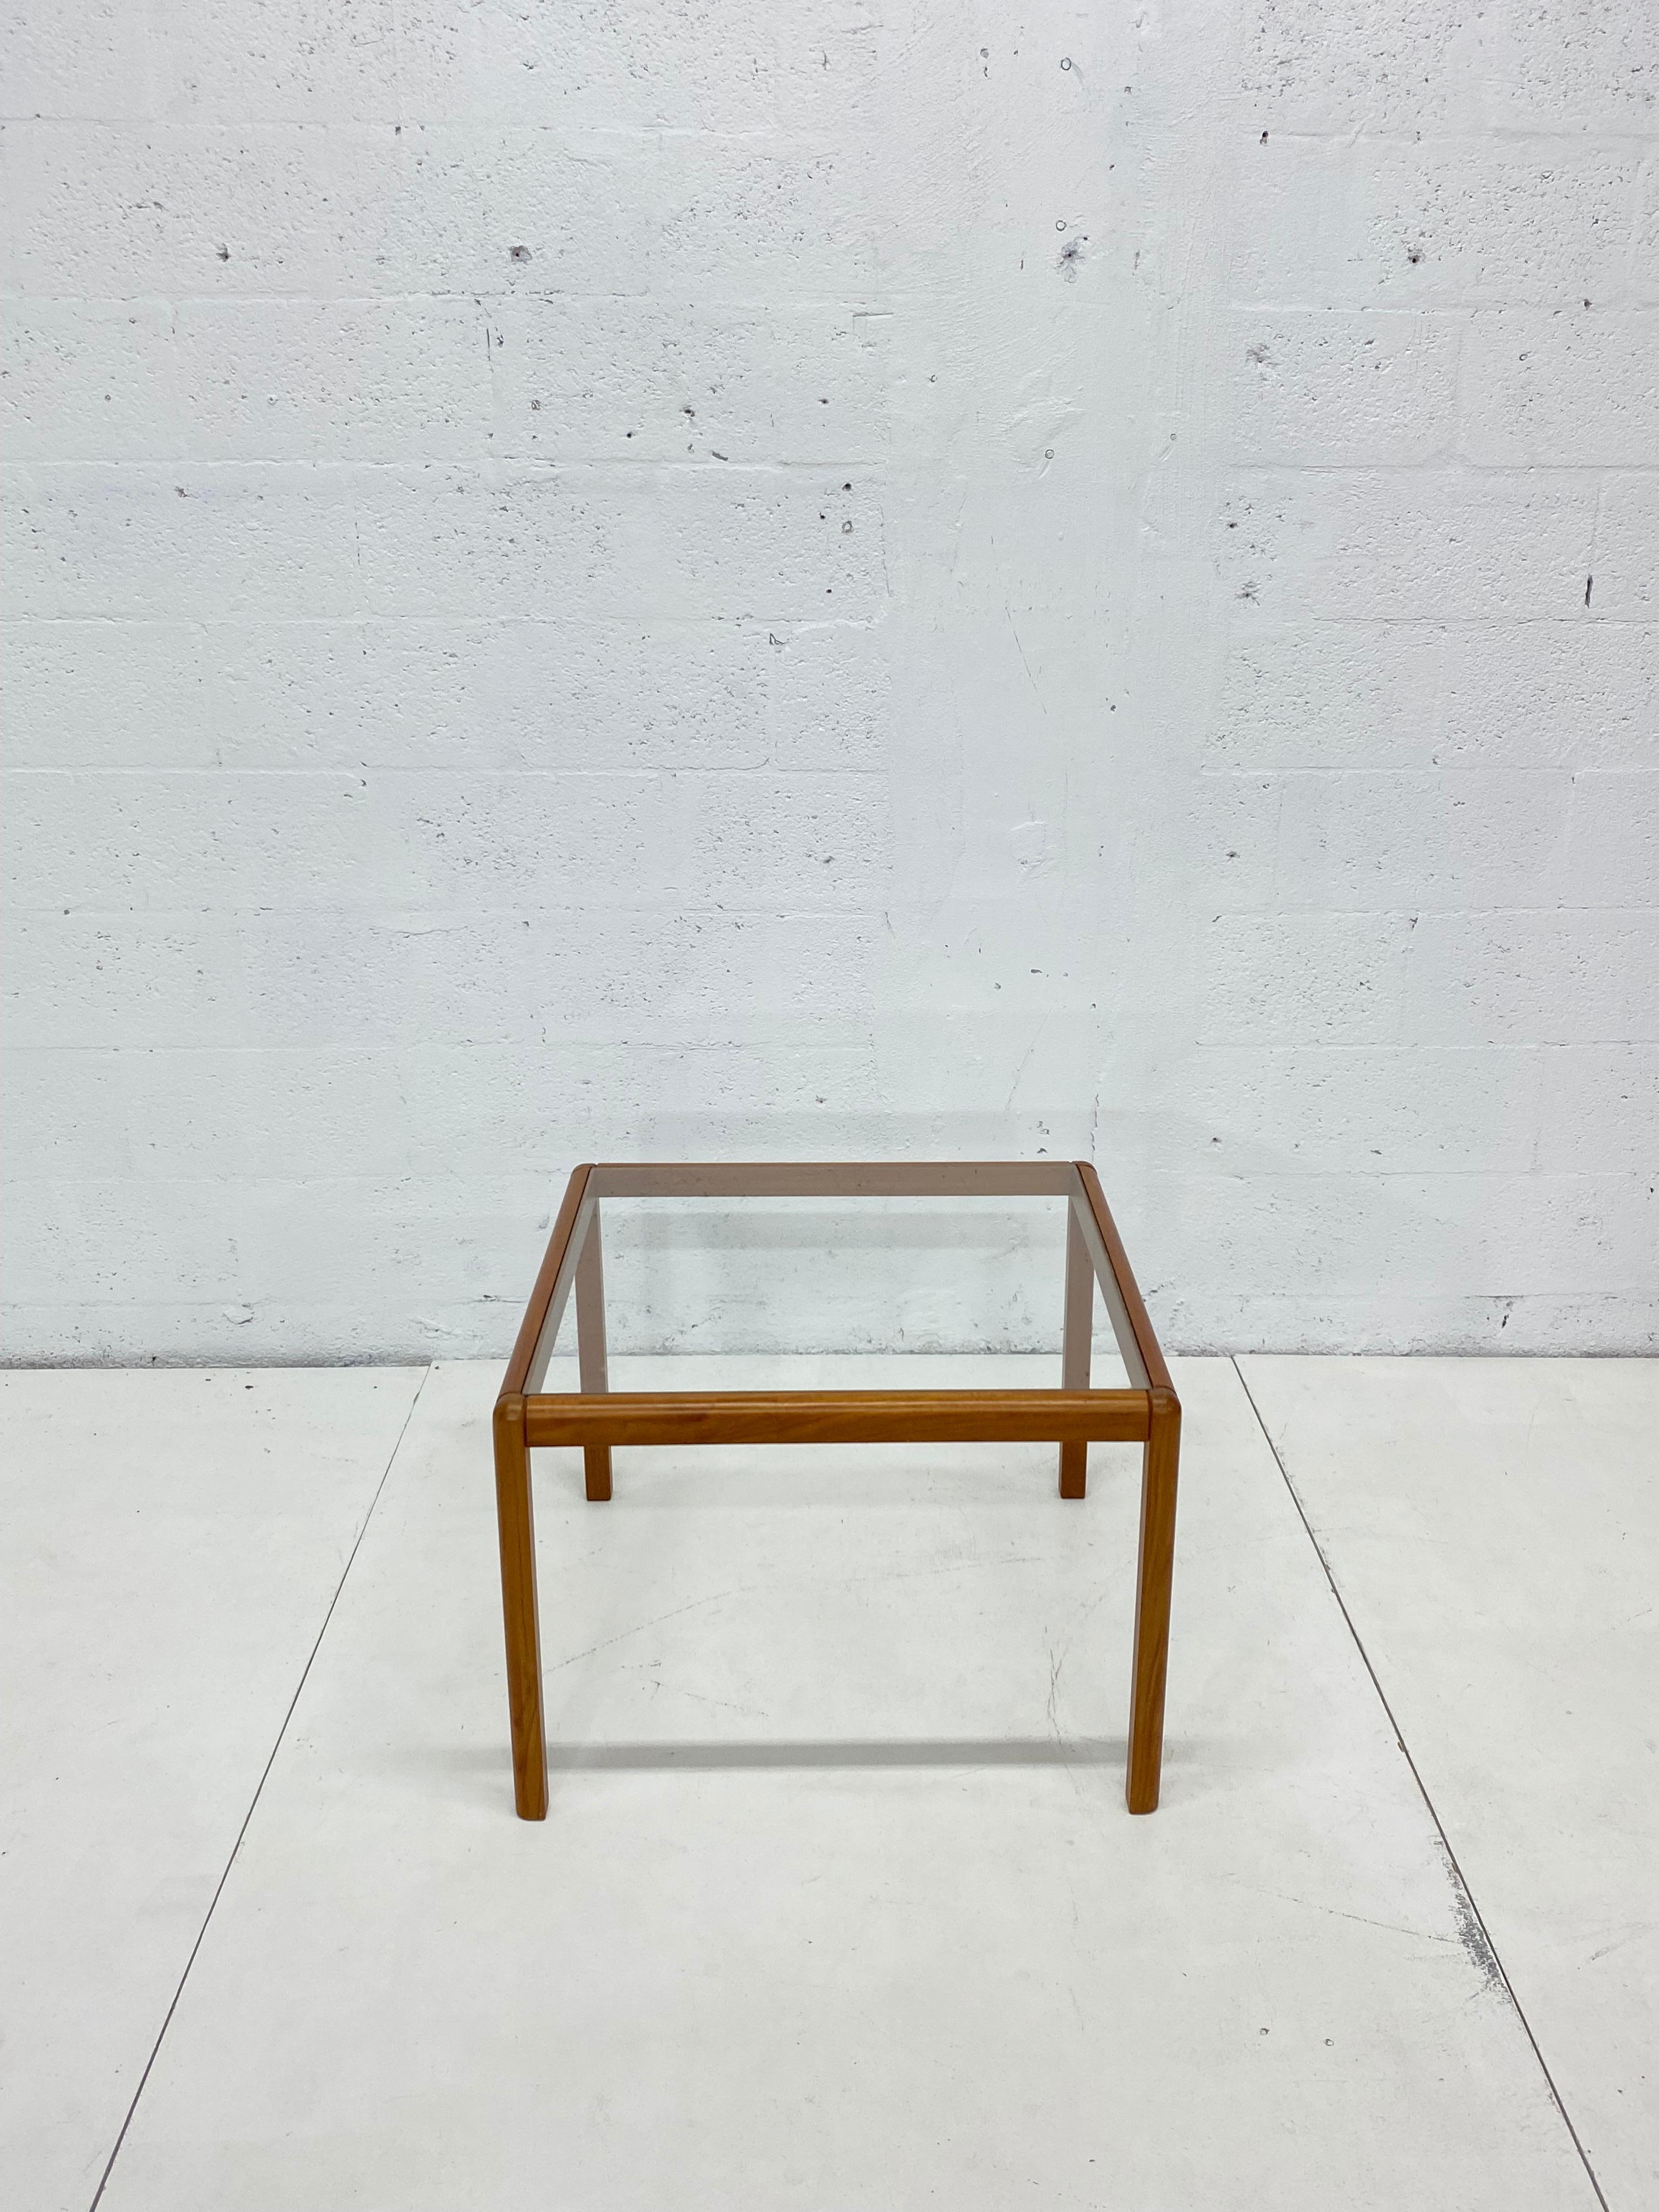 Mid-century Danish modern wood frame and glass top side tables from the 1970s. Could also be used as coffee or cocktail tables.